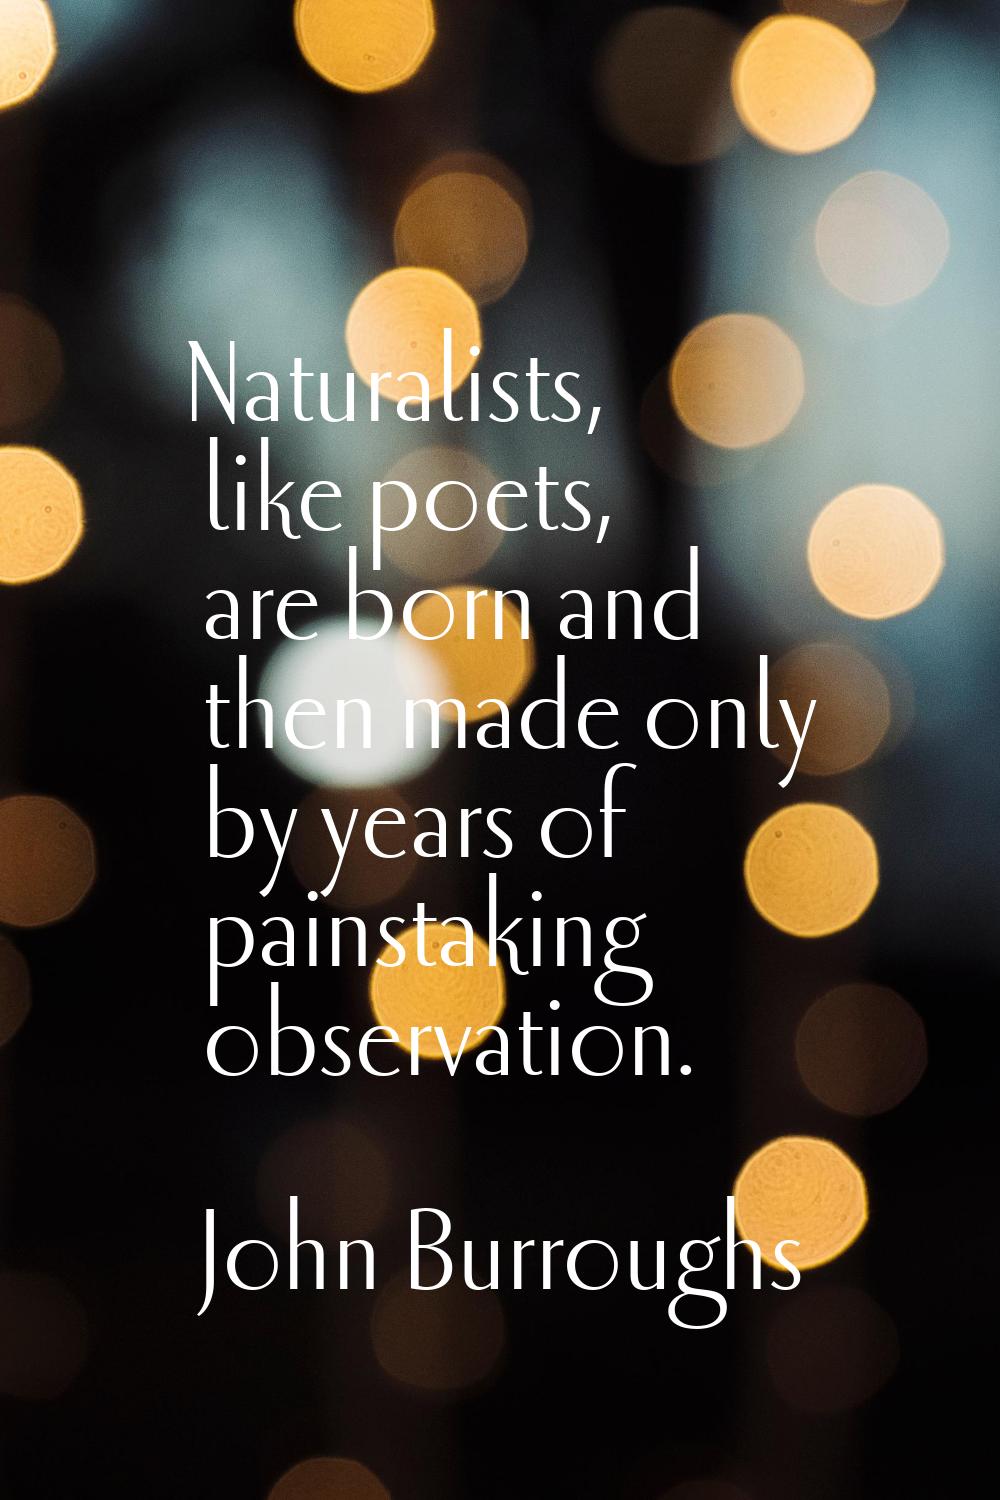 Naturalists, like poets, are born and then made only by years of painstaking observation.